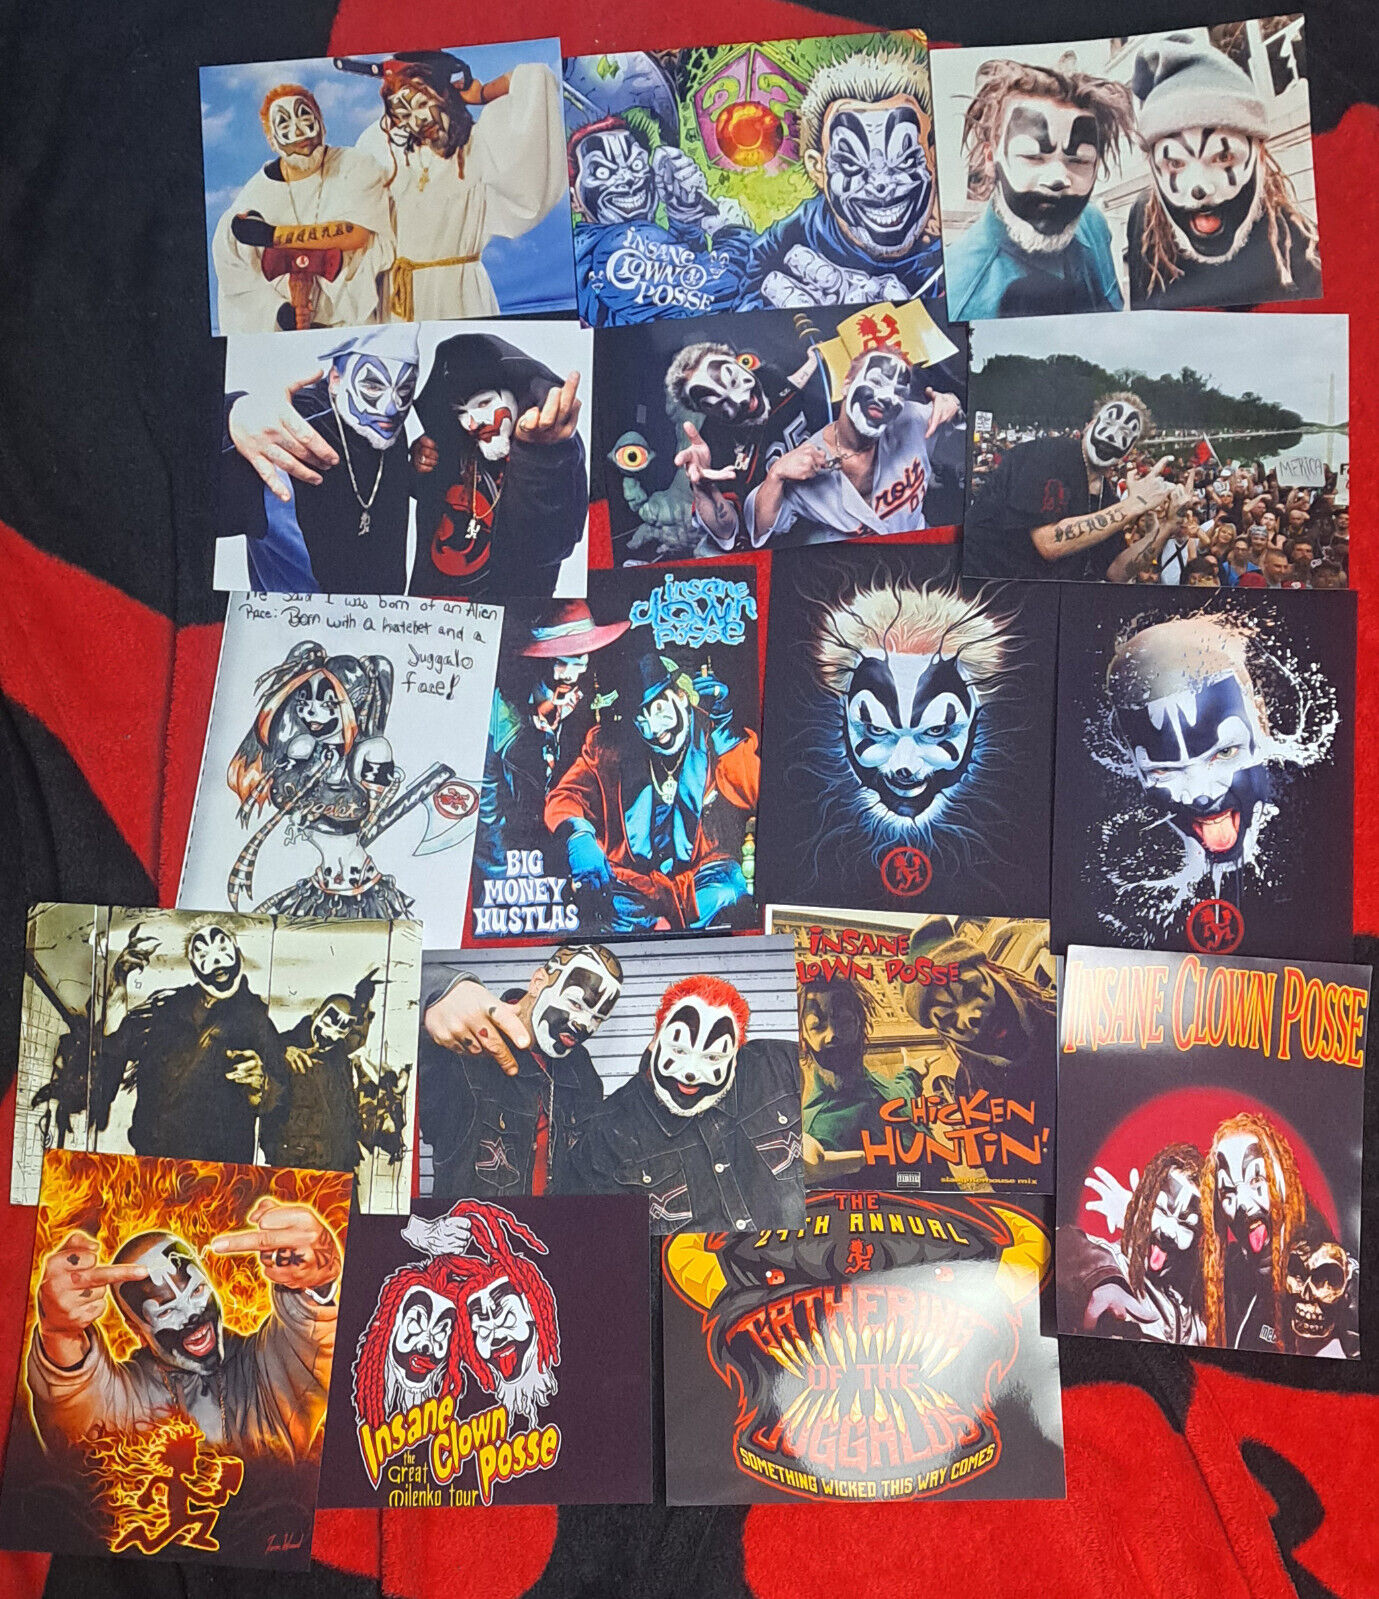 Insane Clown Posse HUGE Lot of 17 Glossy photos/posters ALL MUST GO SALE 8.5x11